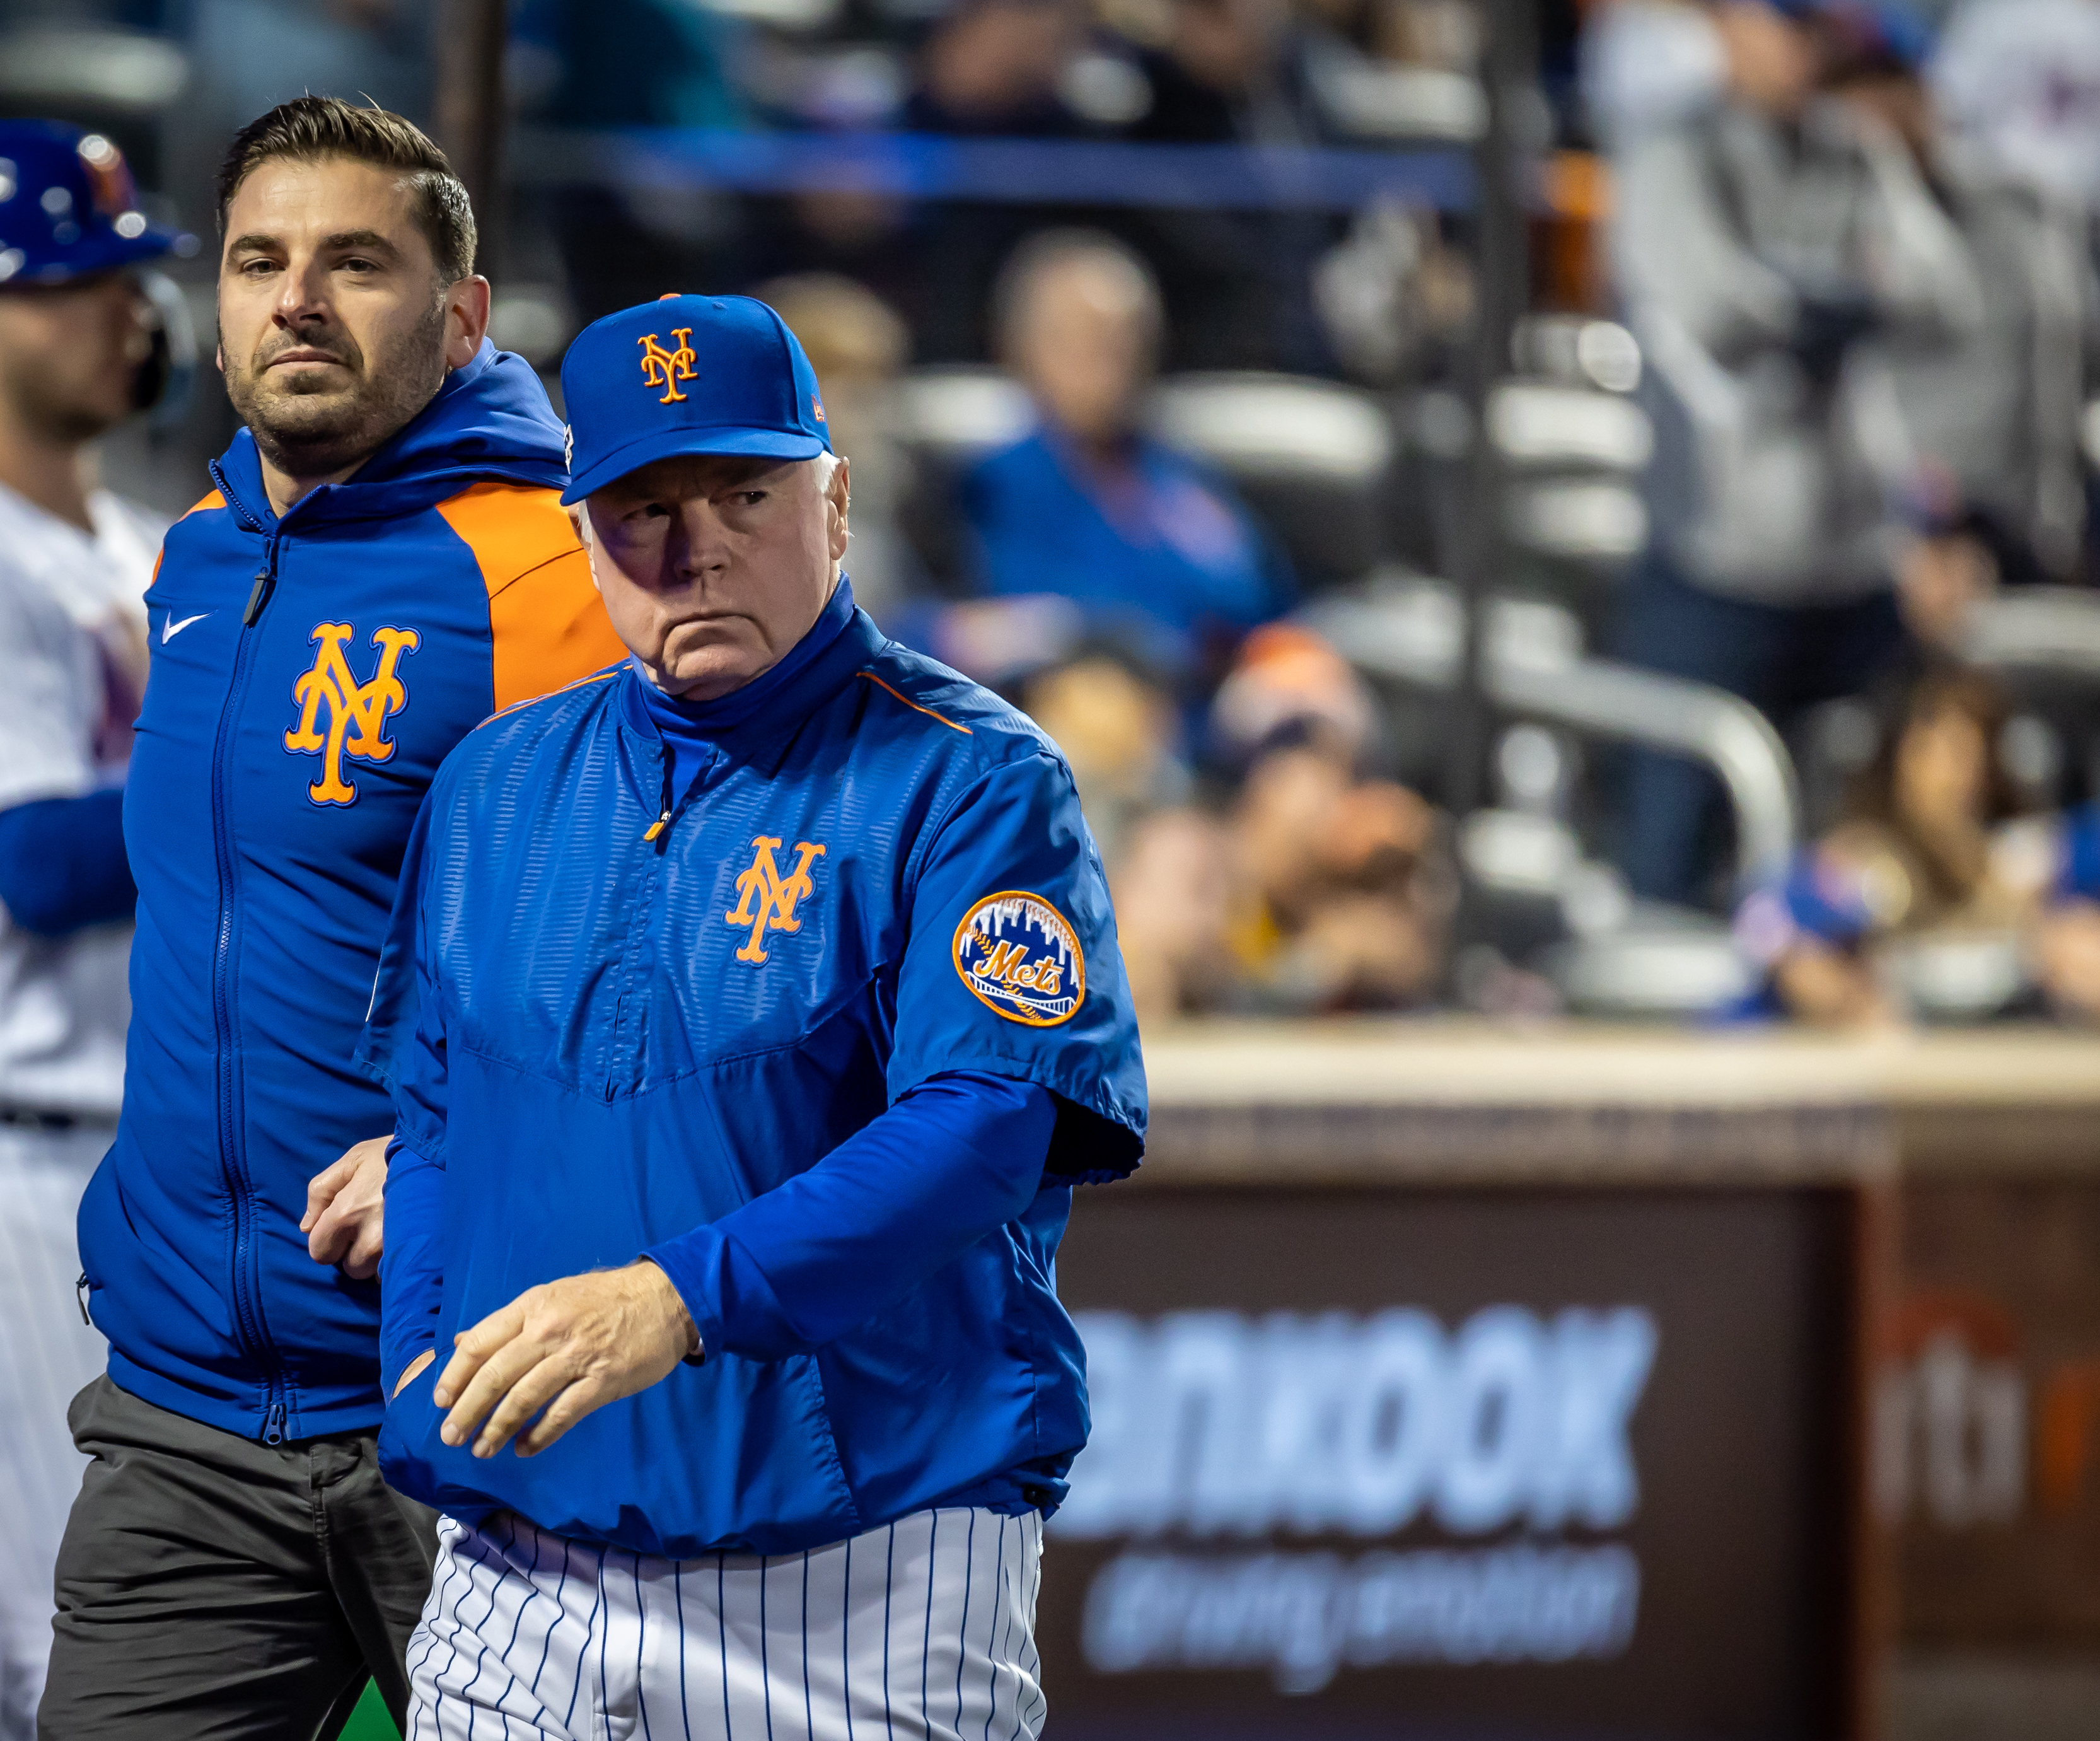 New York Mets manager Buck Showalter returning to the dugout after checking on Francisco Lindor’s injury while playing the San Diego Padres in the bottom of the 4th inning in the best-of-three National League wild-card series at Citi Field in Flushing, New York, October 9, 2022.